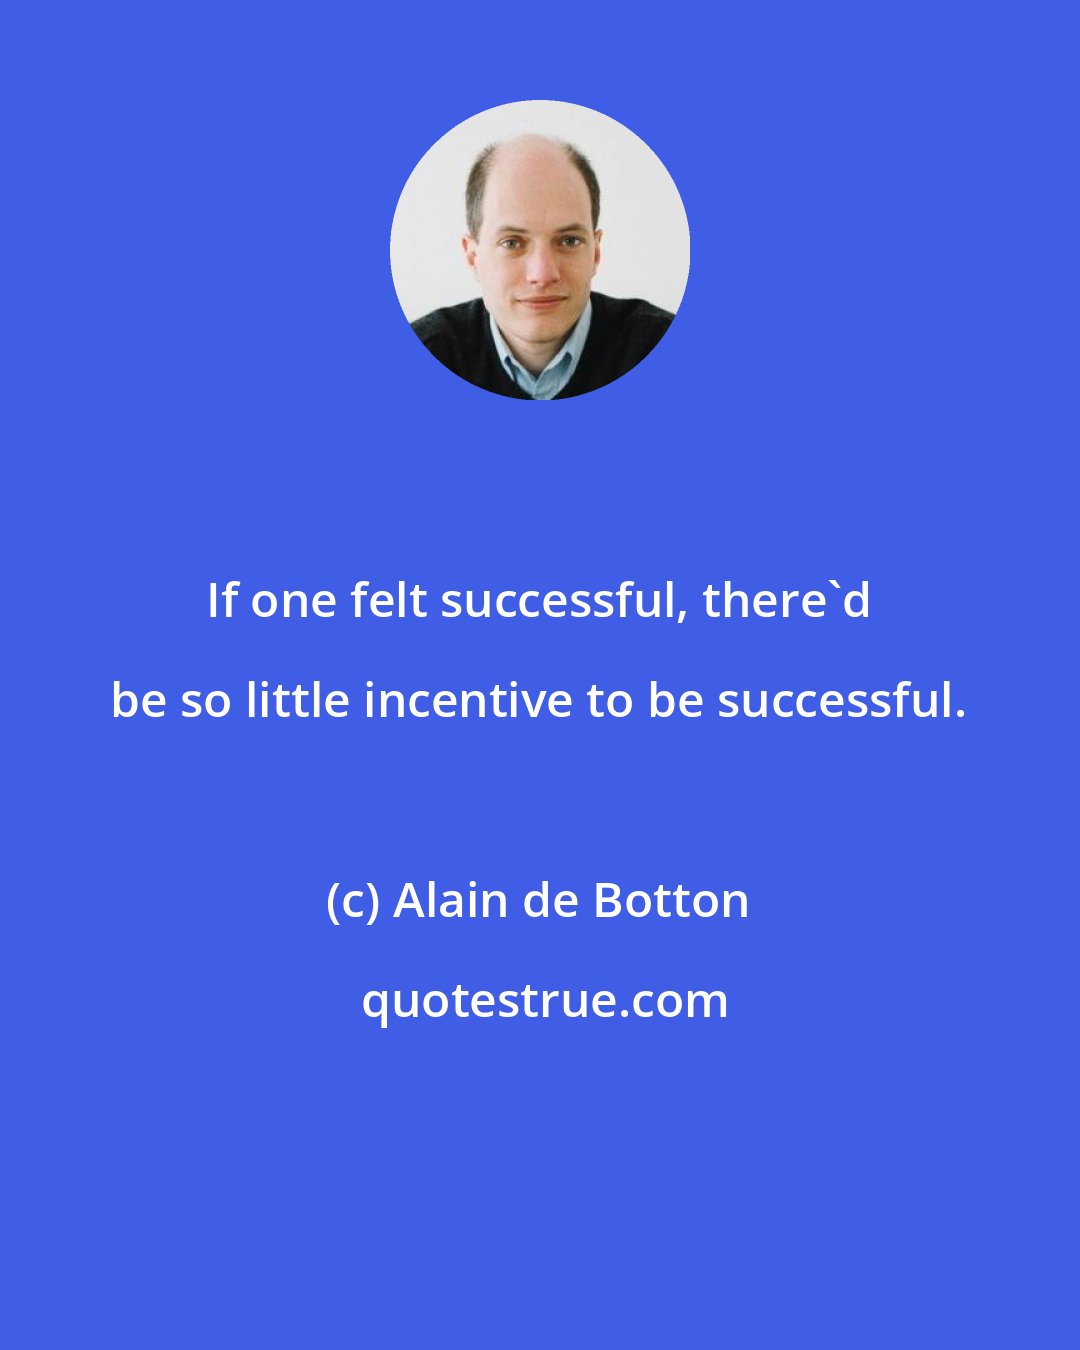 Alain de Botton: If one felt successful, there'd be so little incentive to be successful.